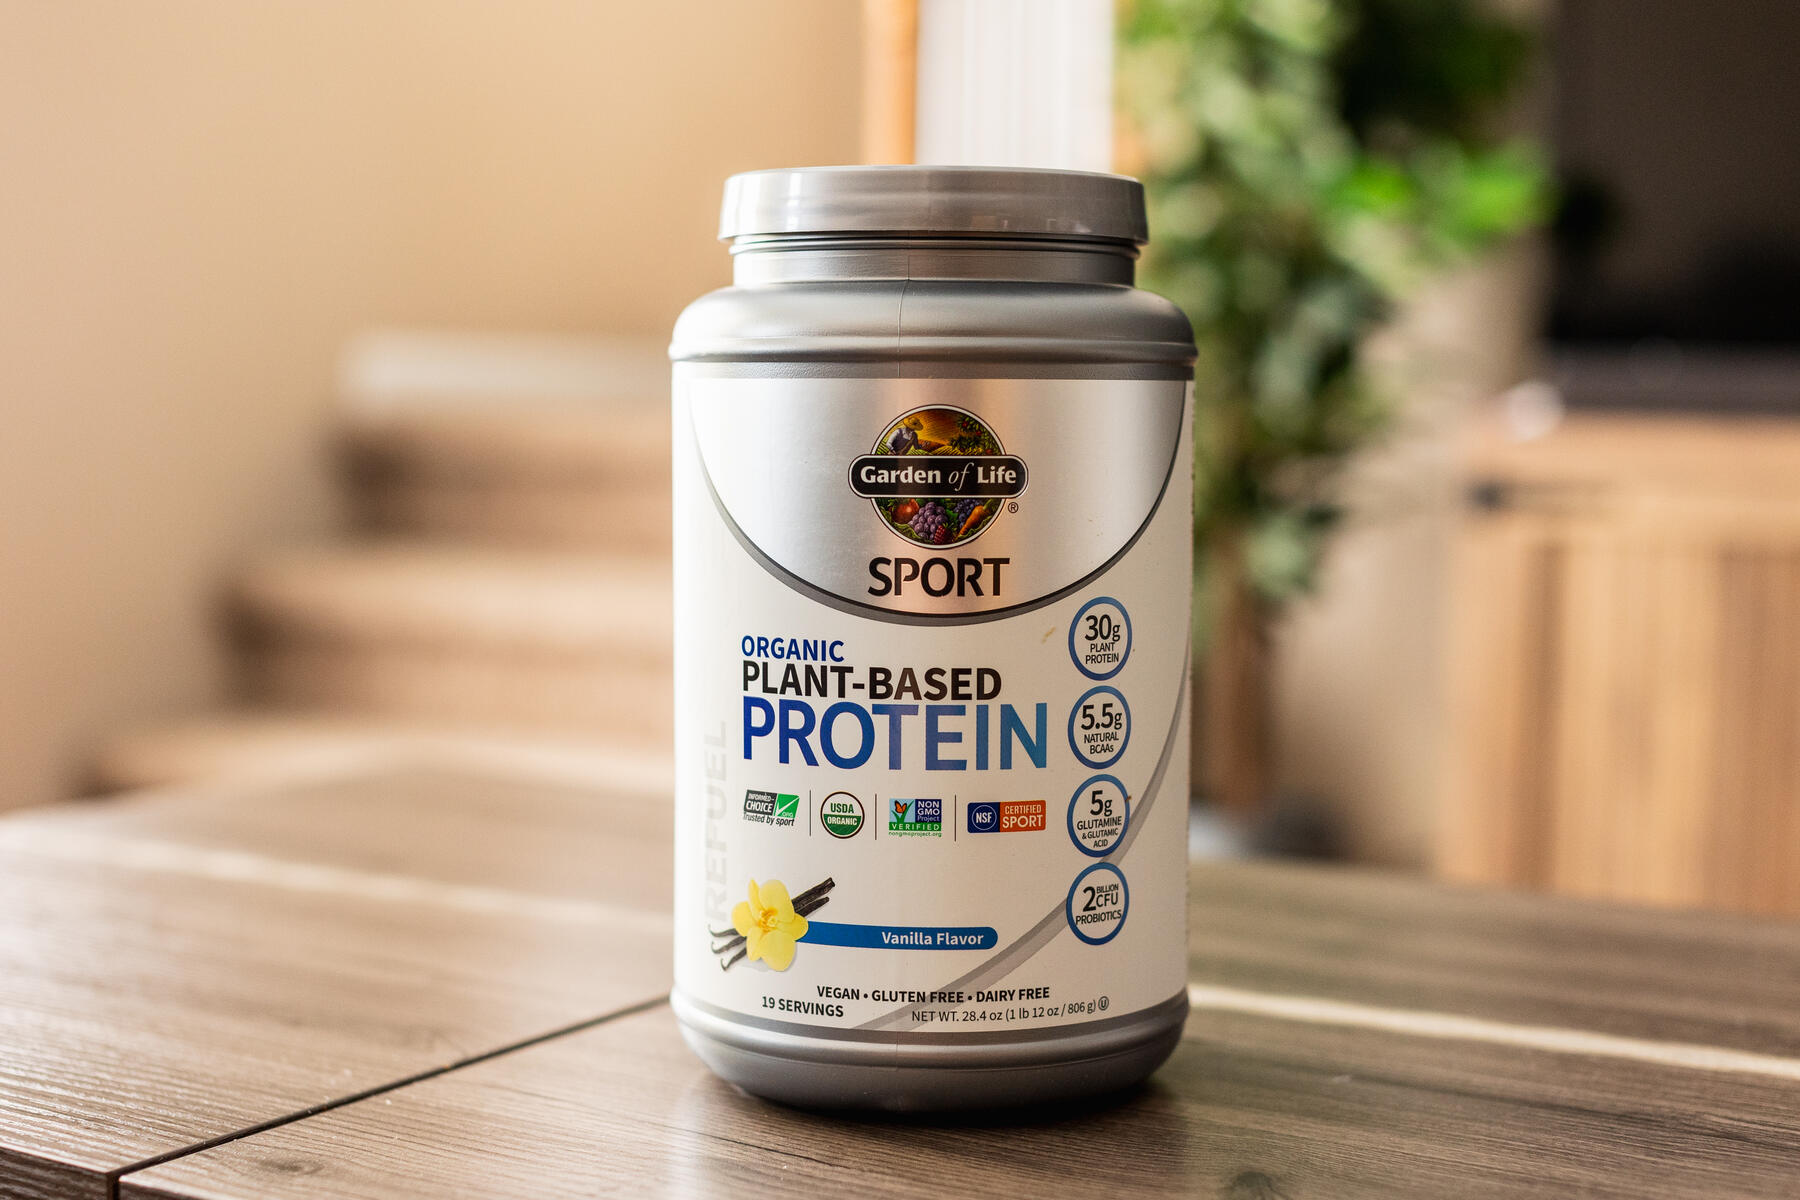 A silver container of Garden of Life Sport Organic Plant-Based Protein powder in vanilla flavor, placed on a wooden surface with greenery in the background